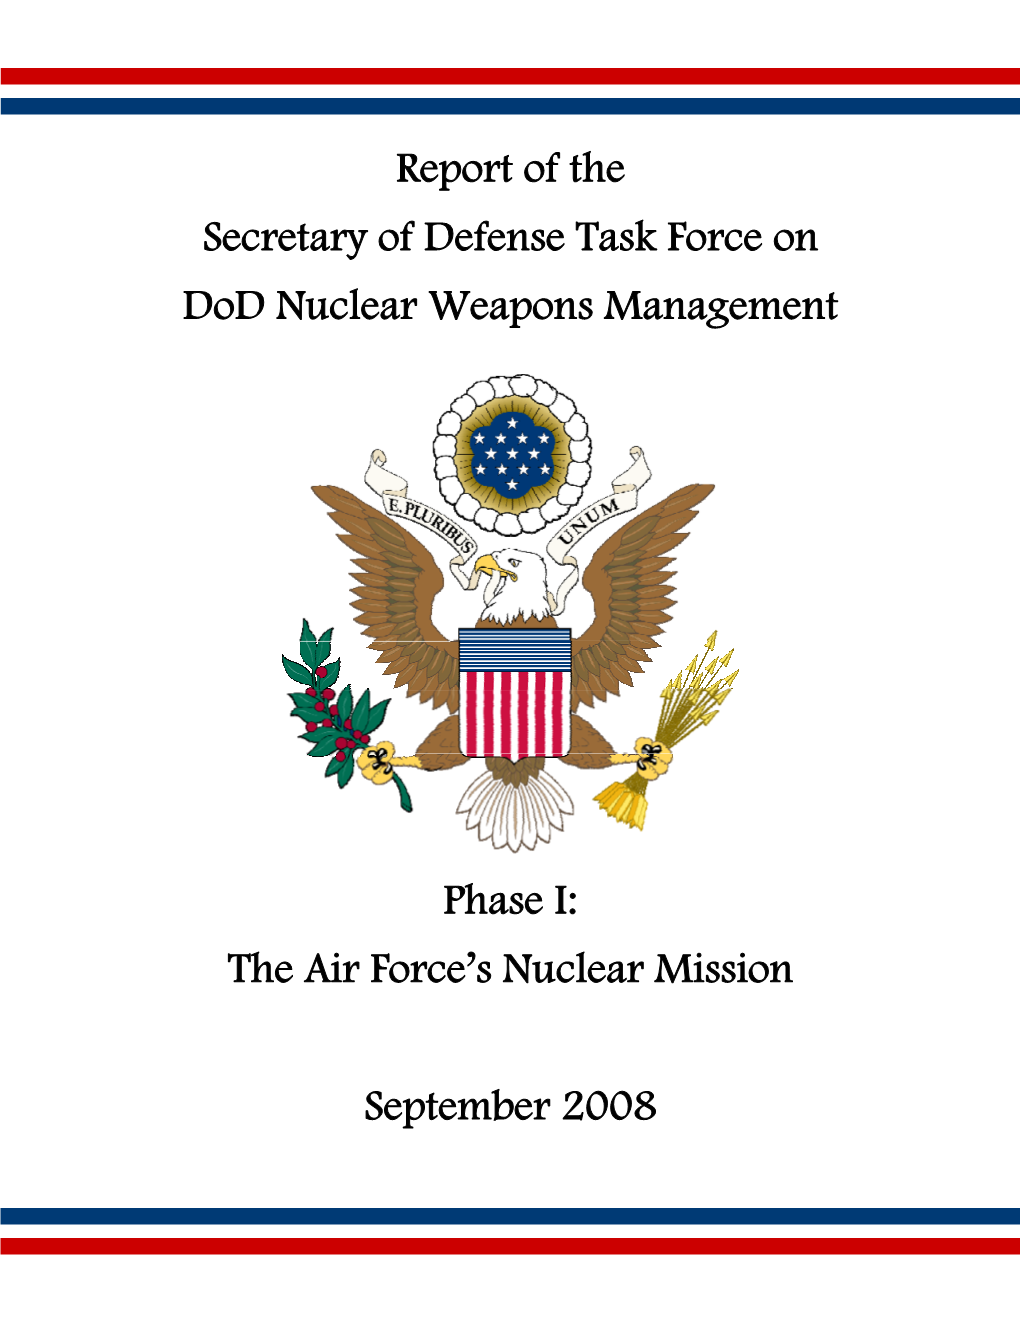 Secretary of Defense Task Force on Dod Nuclear Weapons Management